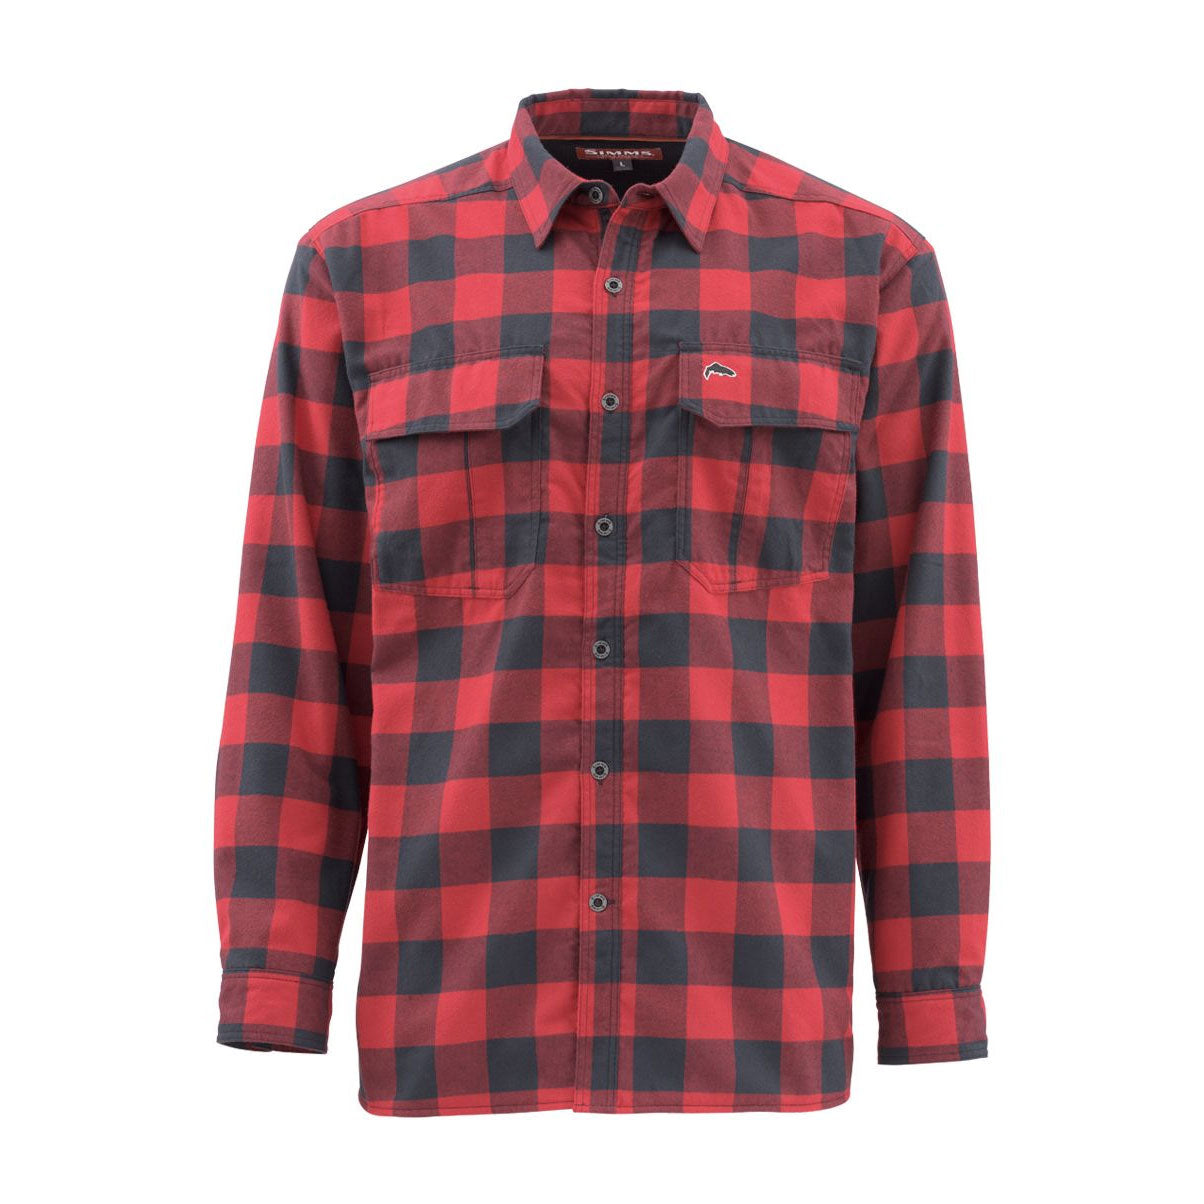 Simms Cold Weather Long Sleeve Shirt - Red Buffalo Plaid